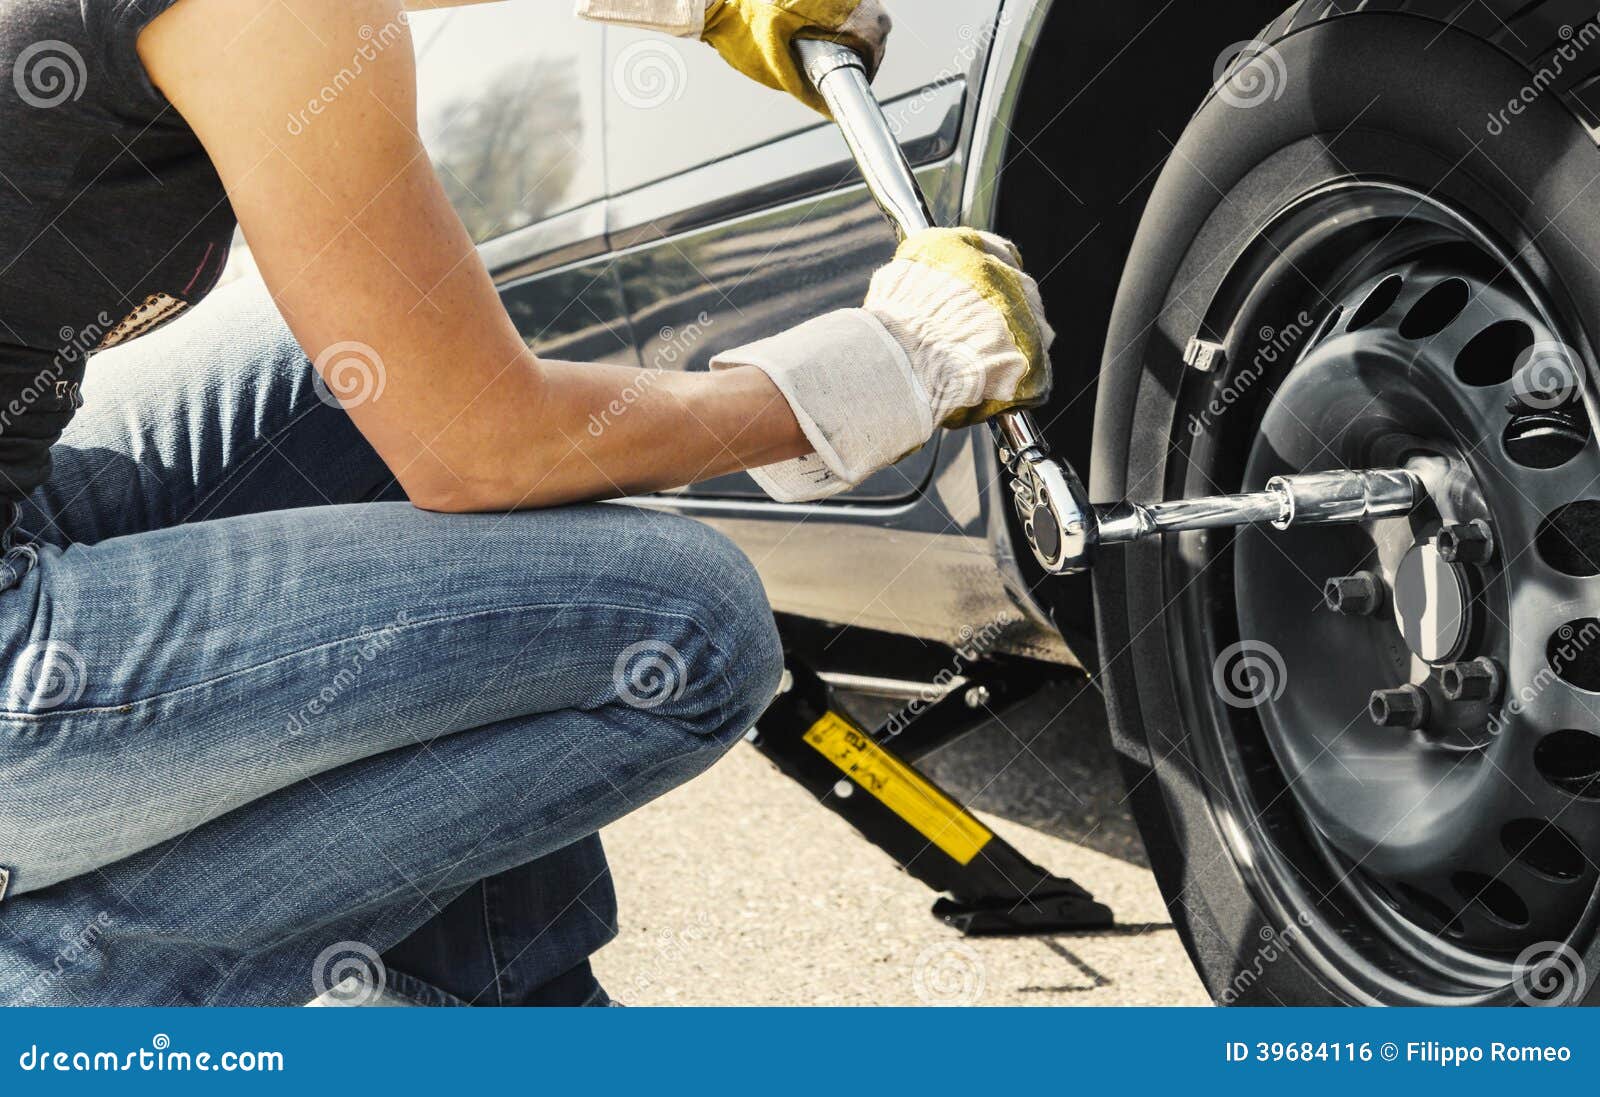 woman changing tire car